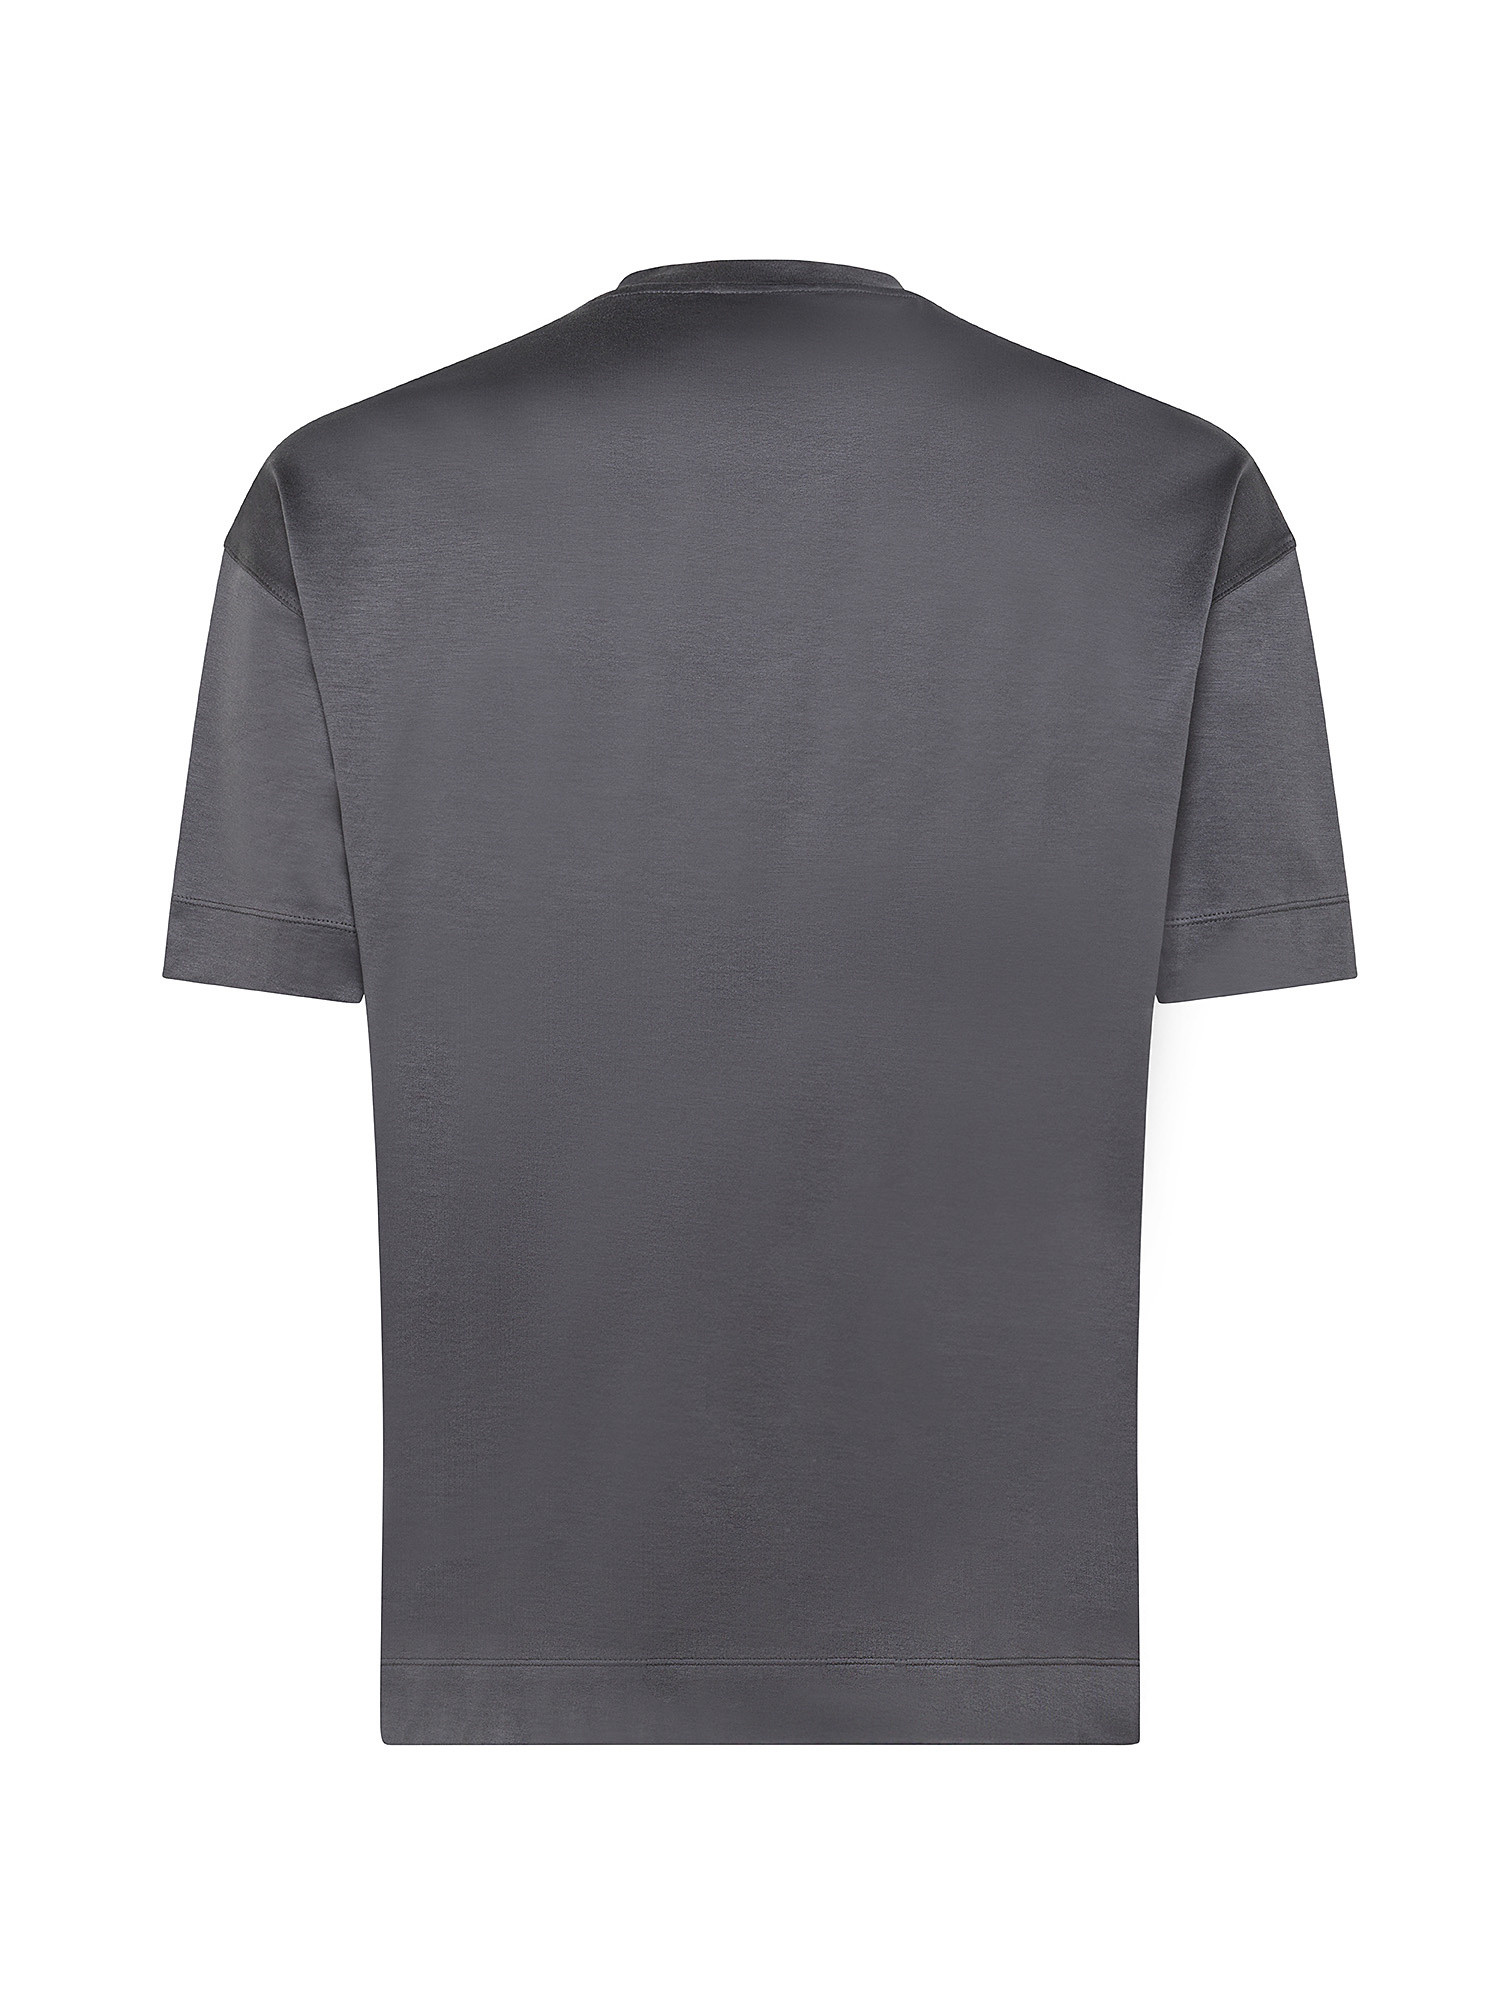 Emporio Armani - T-shirt with embroidered logo, Dark Grey, large image number 1